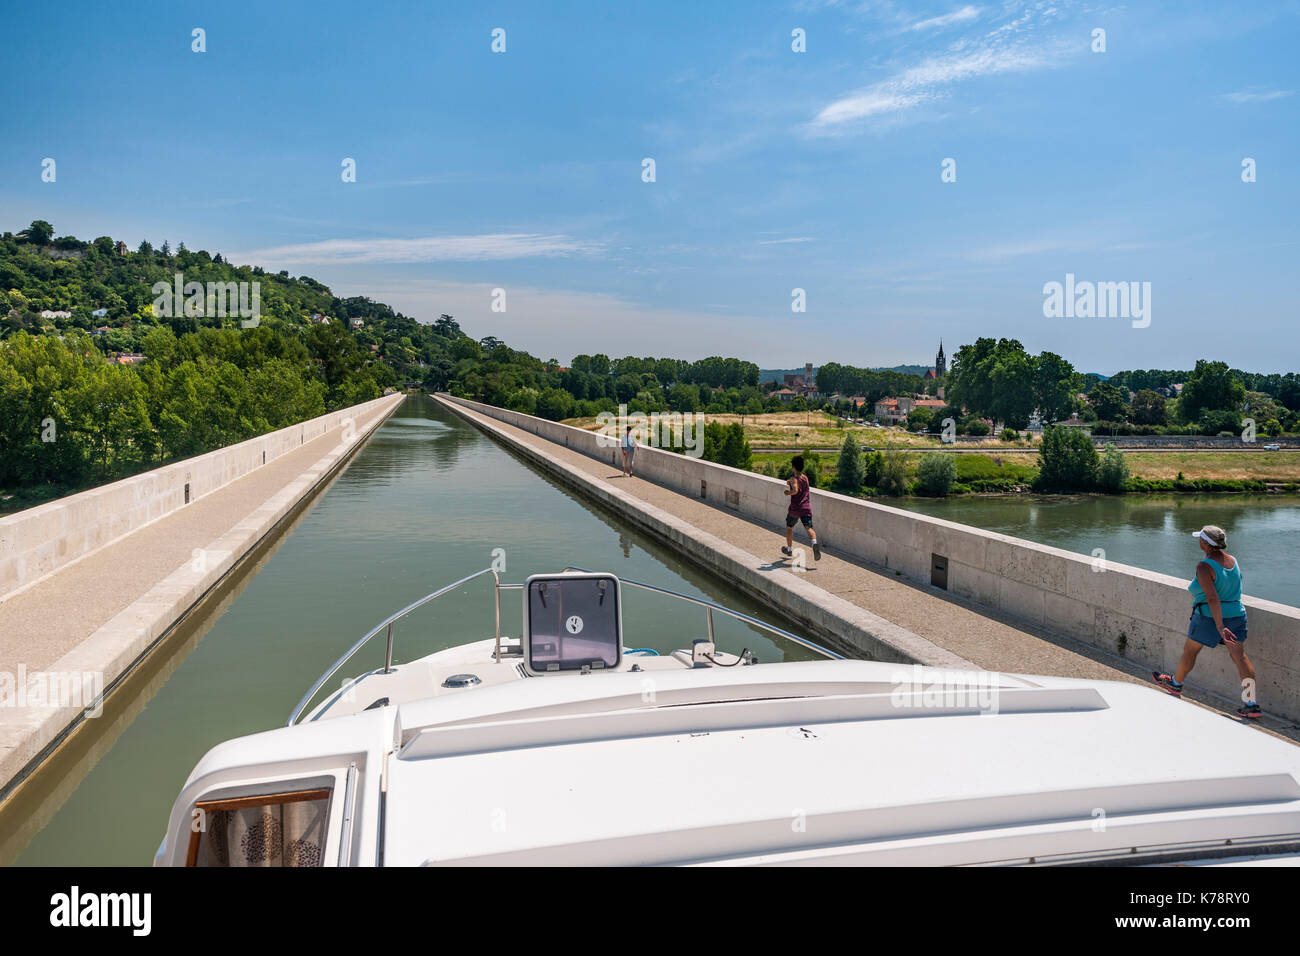 The Canal latéral à la Garonne leading over the Garonne River to the town of Agen in the Dordogne region of southwest France. Stock Photo